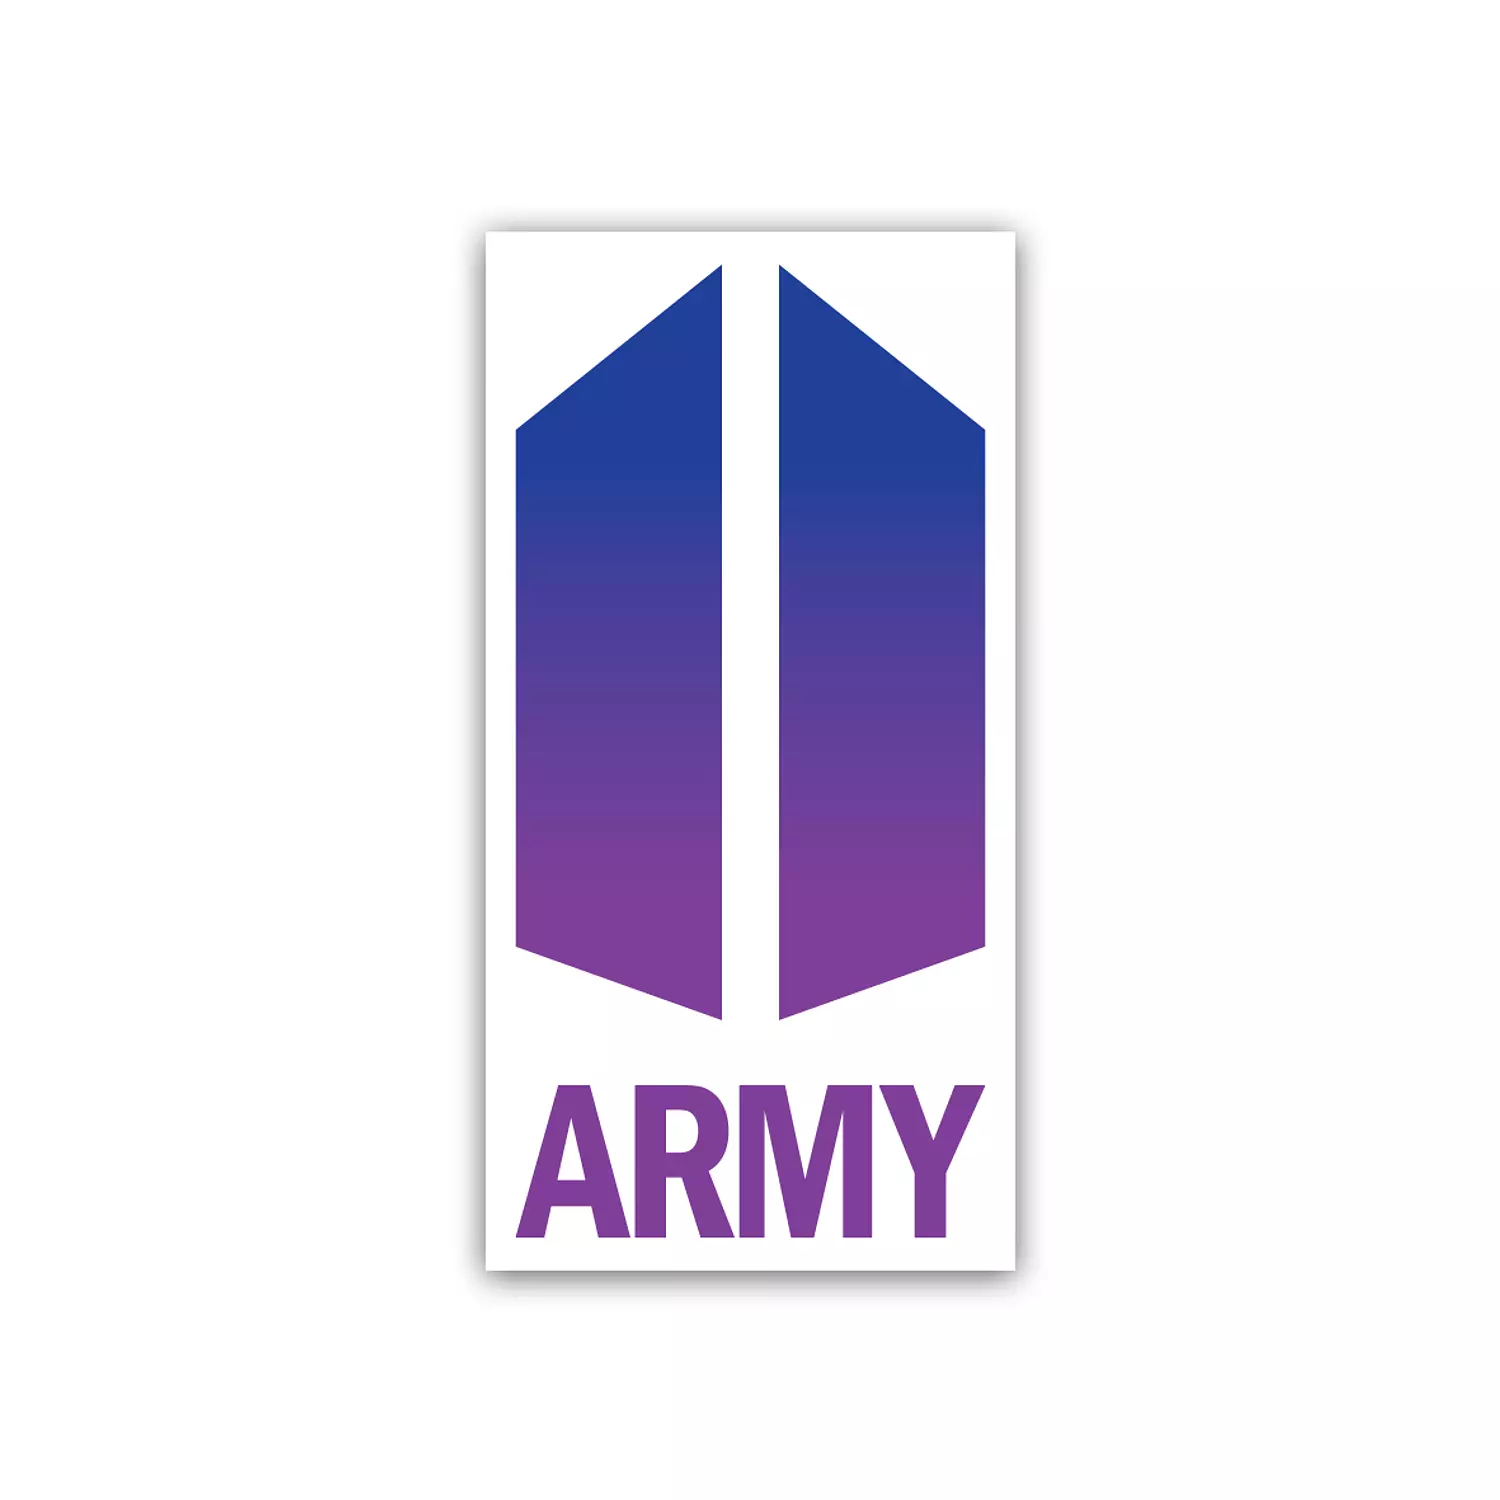 Army K-Pop  hover image